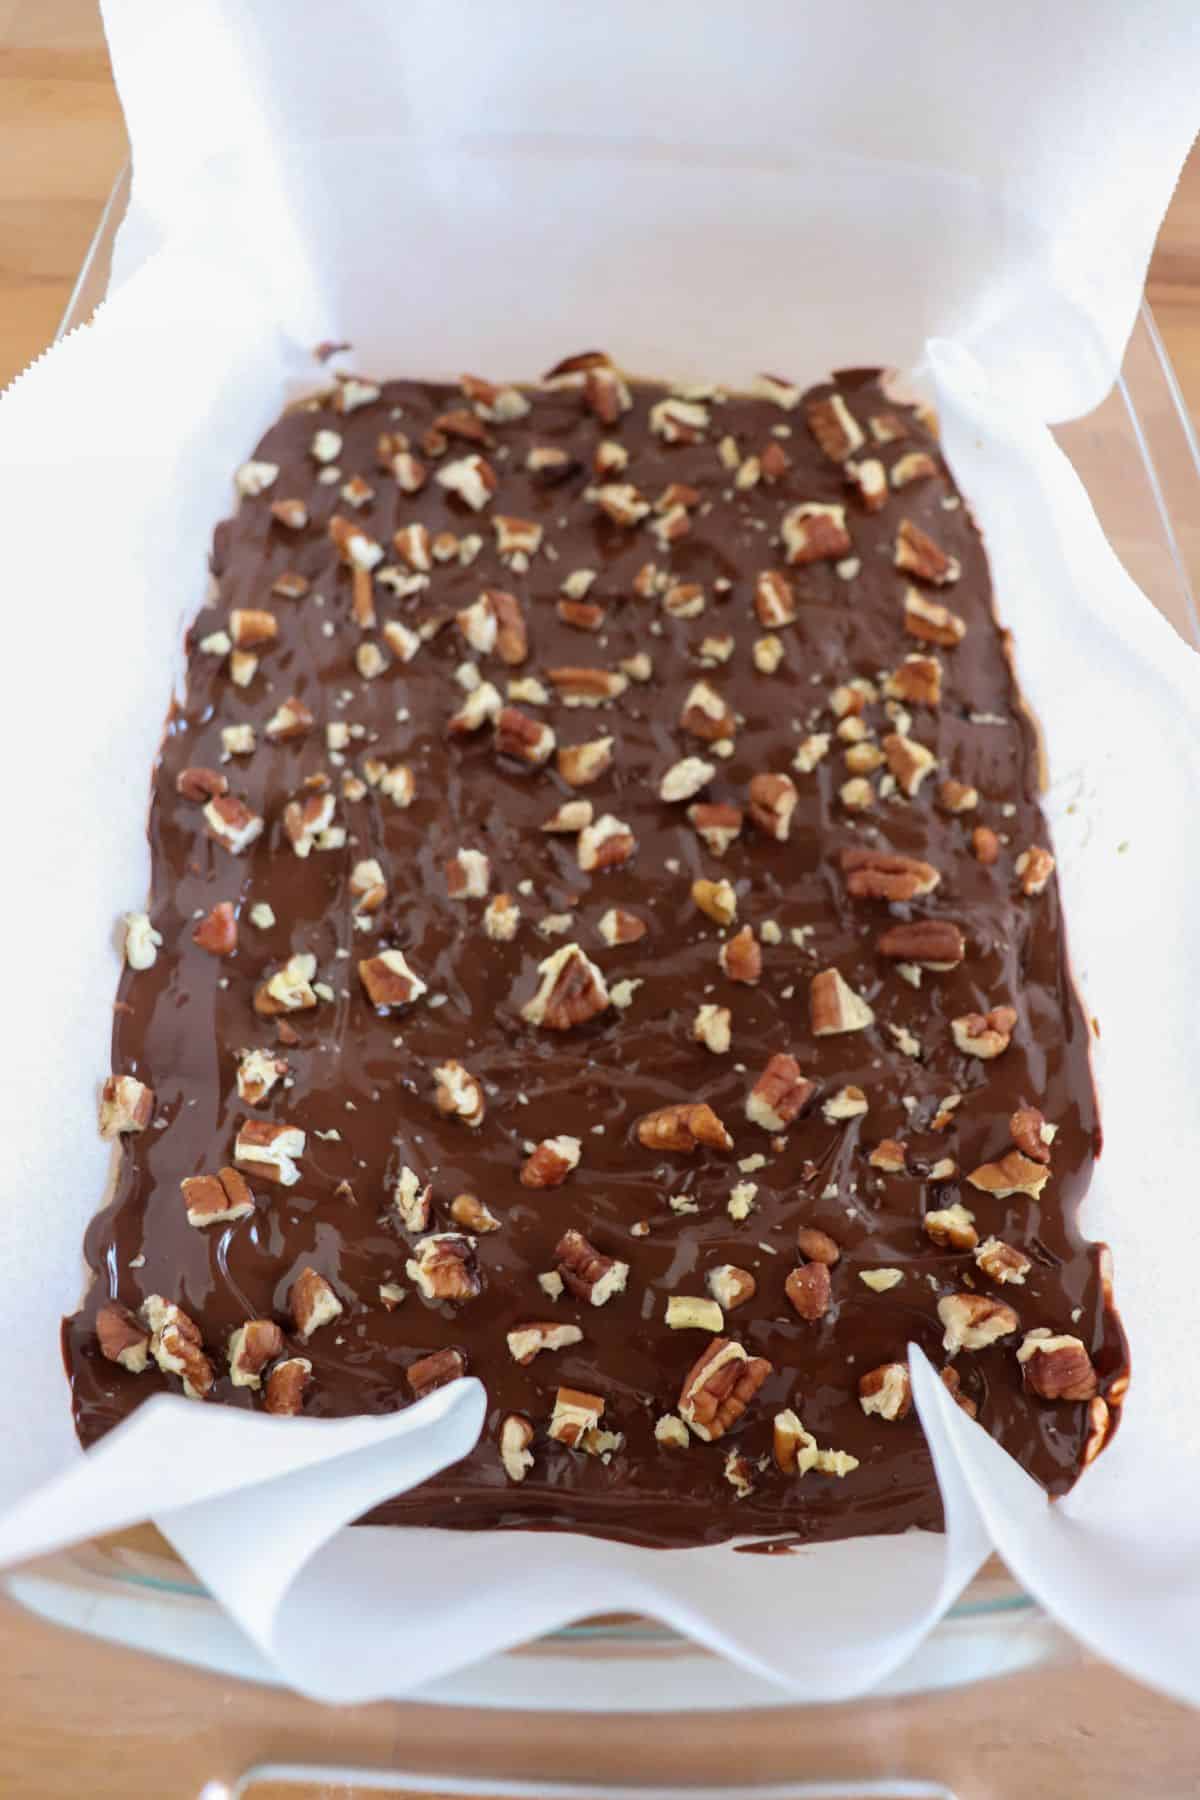 Keto Christmas Crack with pecans in a glass dish.